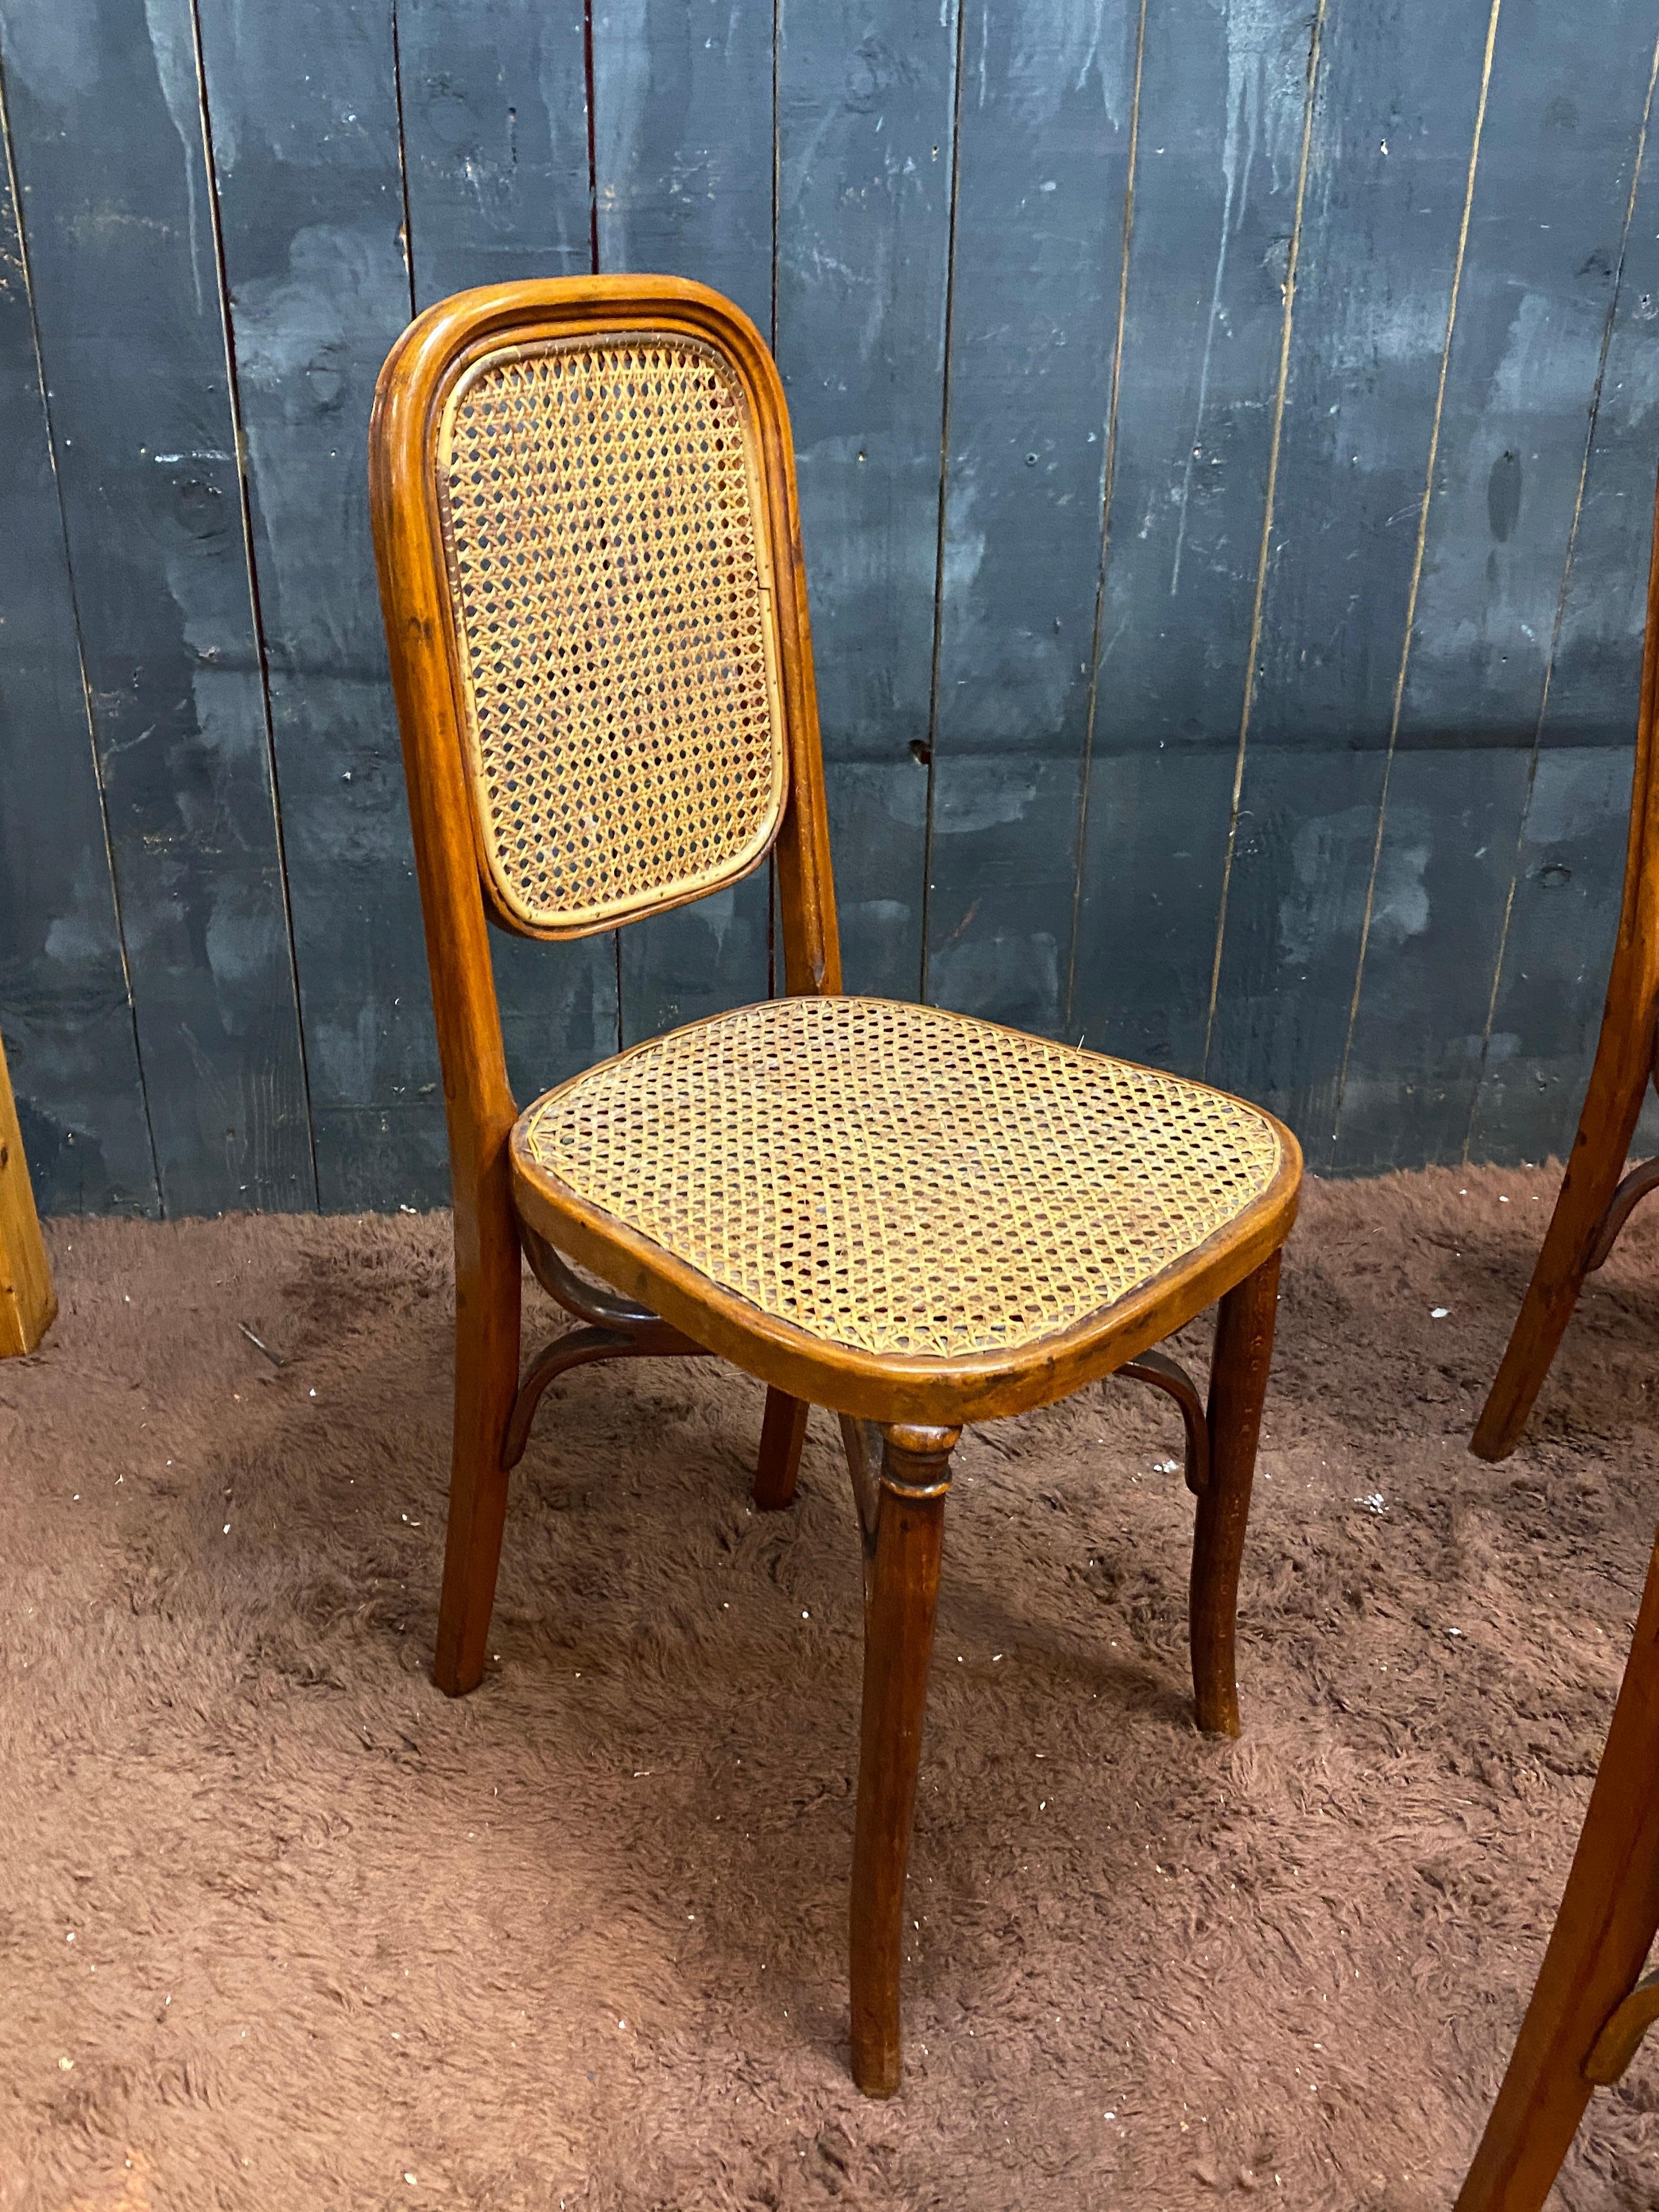 Vienna Secession 5 Thonet style chairs circa 1900 For Sale